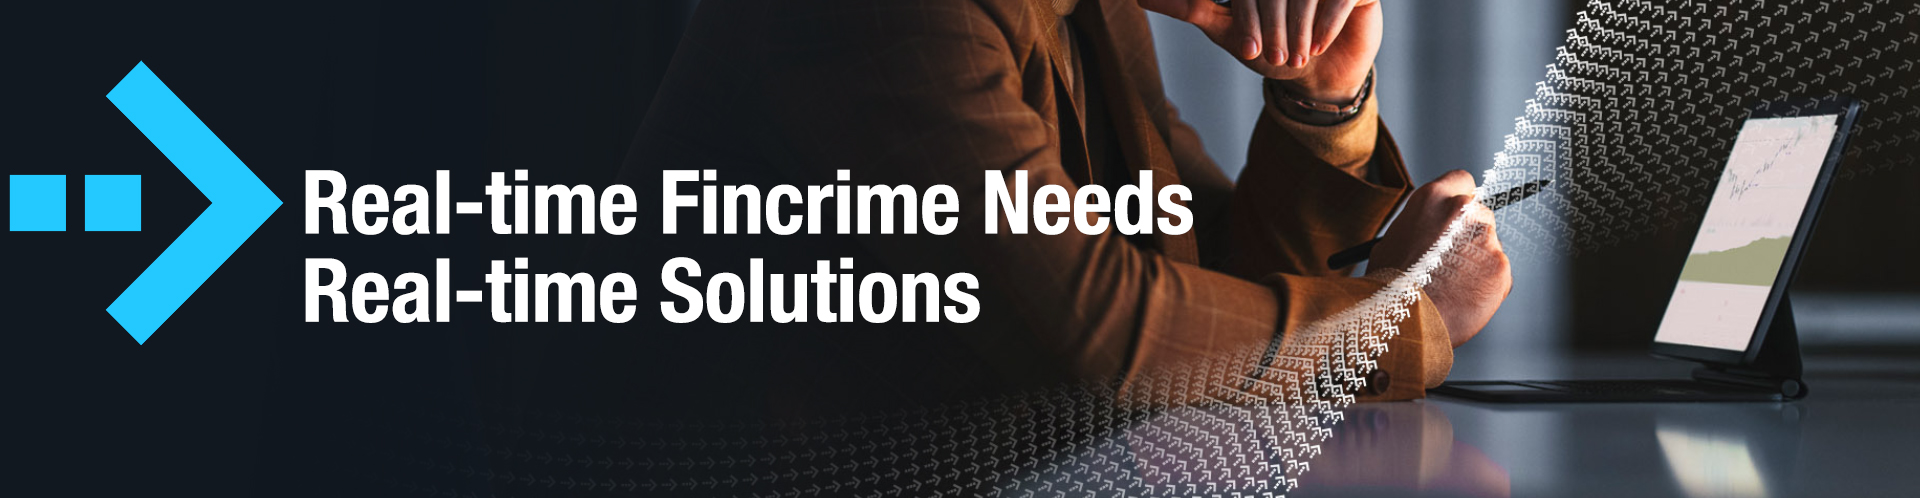 Real-time fincrime needs real-time solutions webinar series